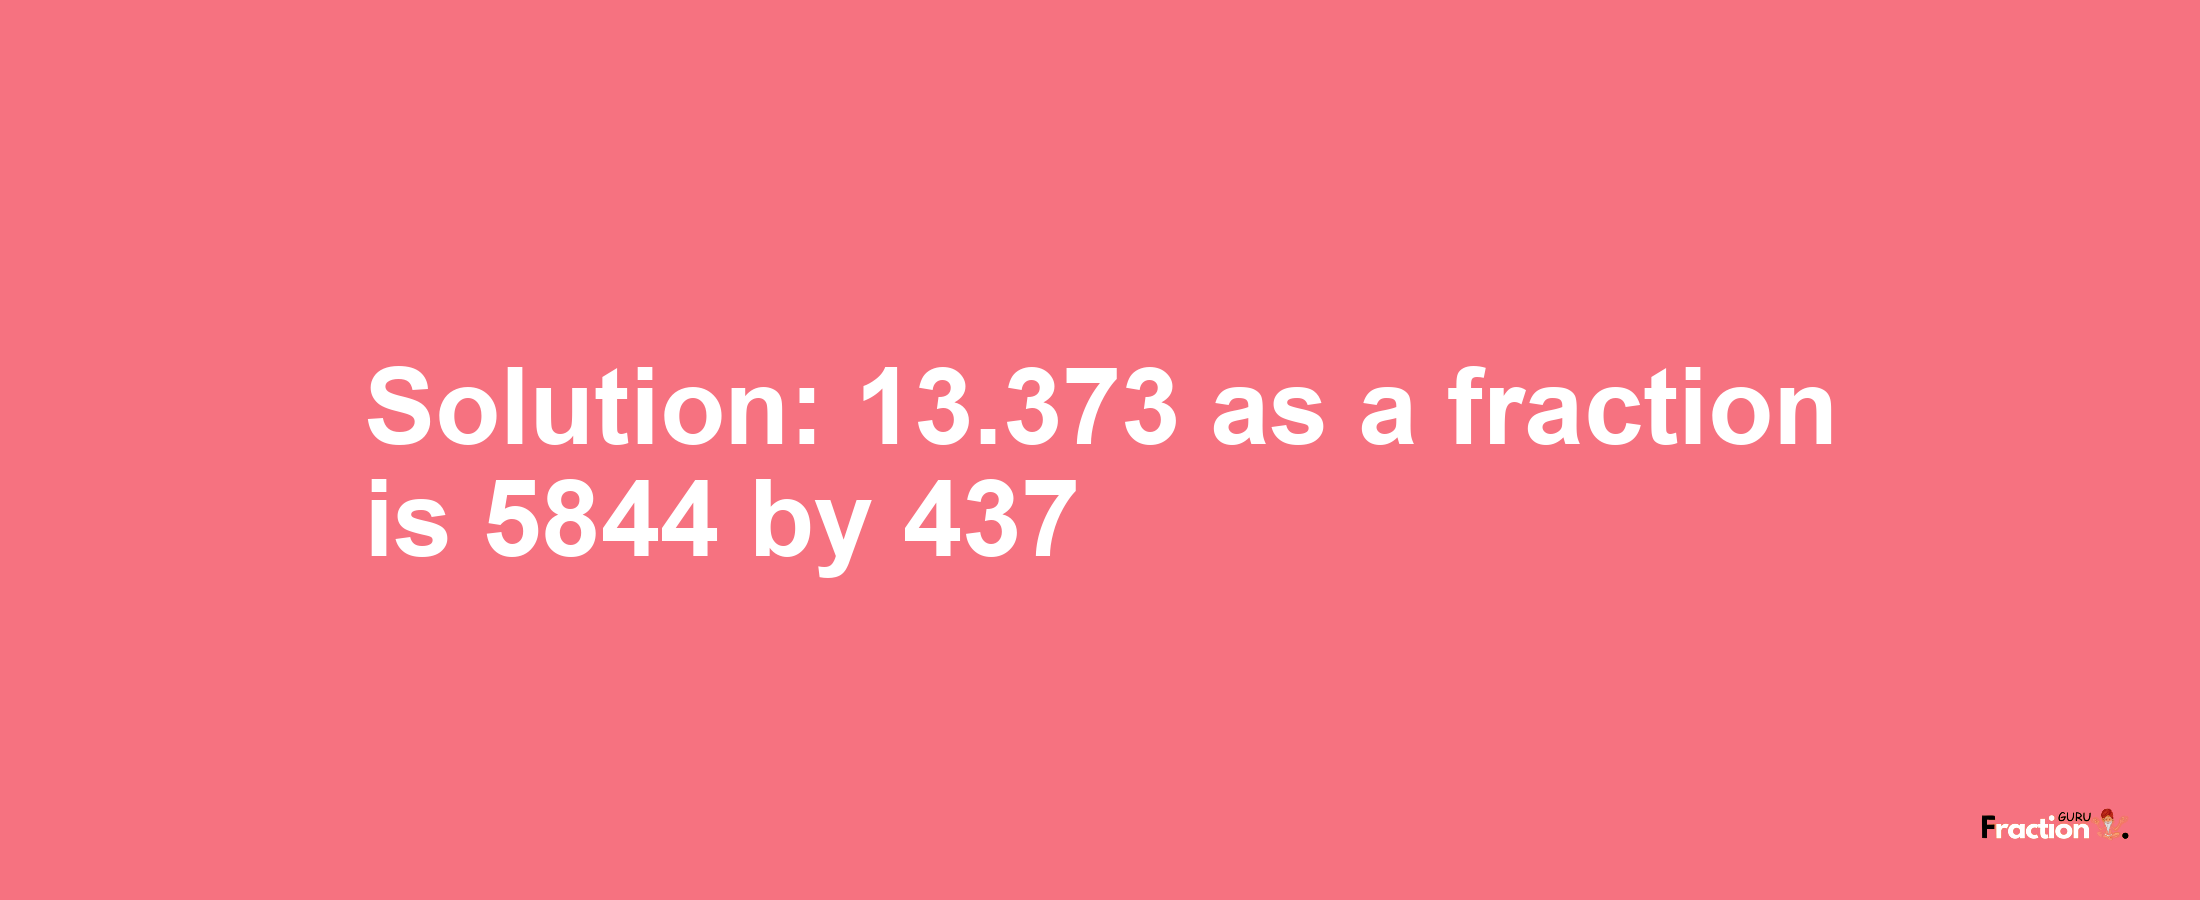 Solution:13.373 as a fraction is 5844/437